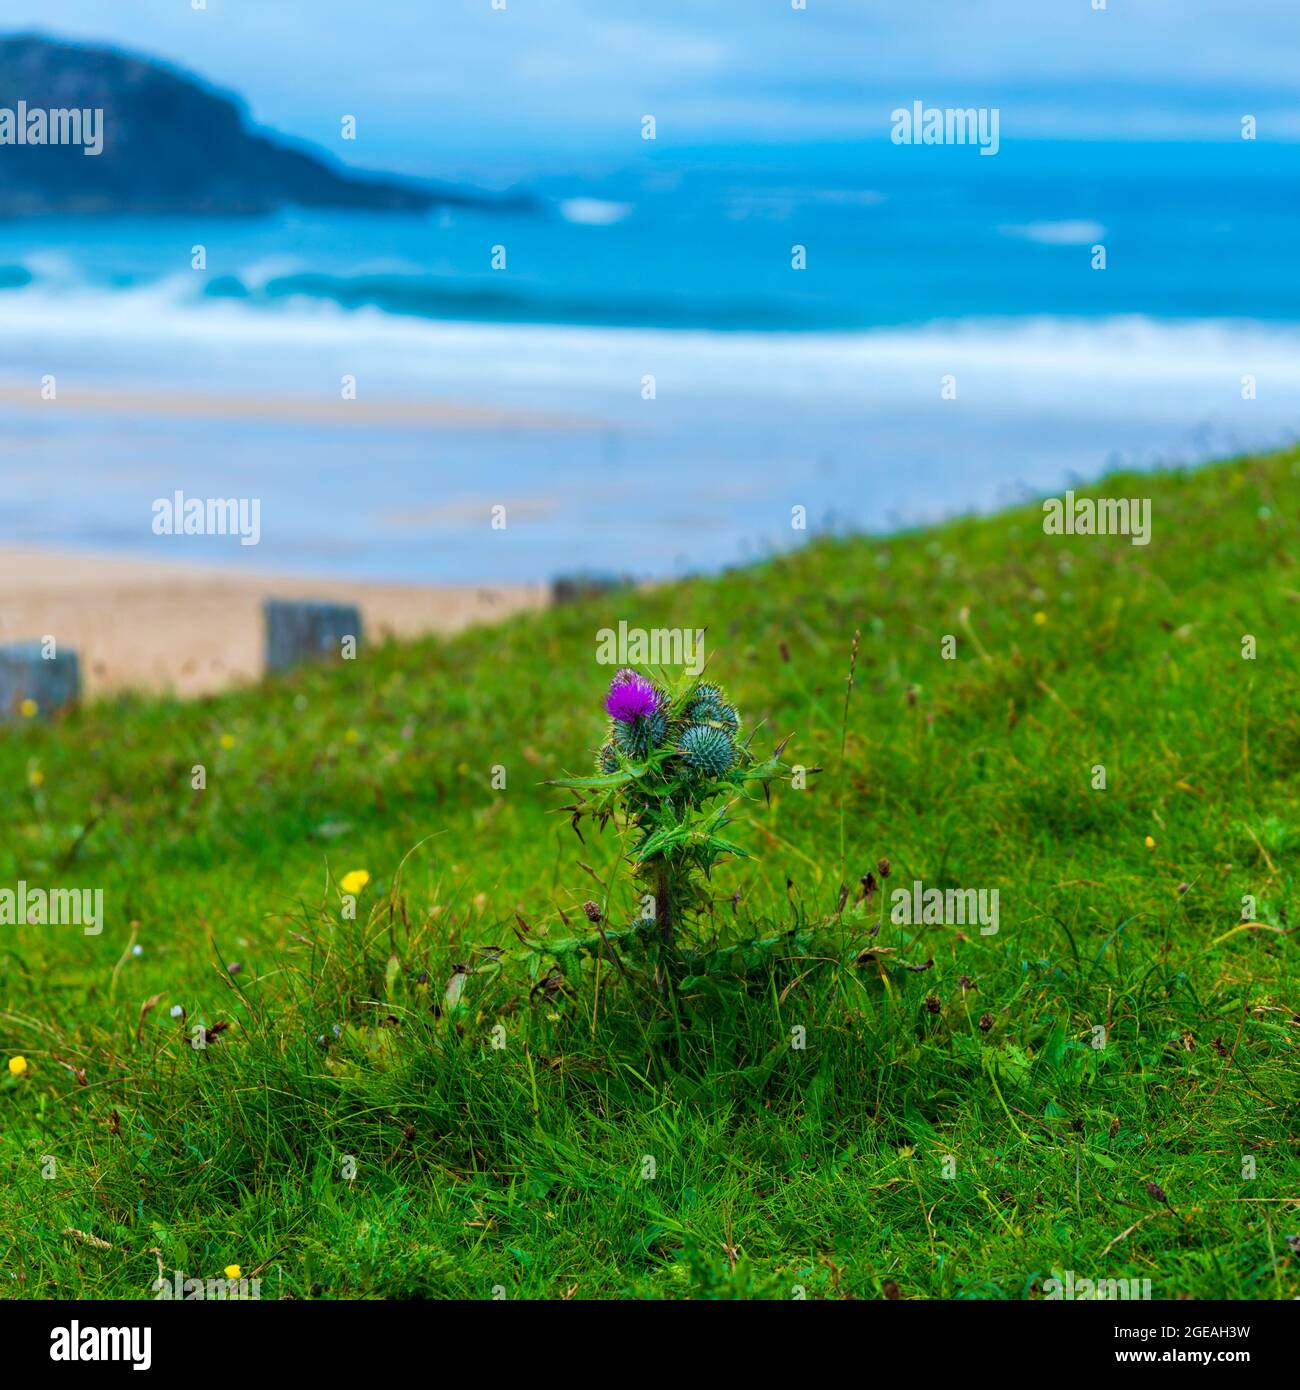 A Scottish thistle blooming against Dalmore beach on the Isle of Lewis, Outer Hebrides, Scotland, UK Stock Photo